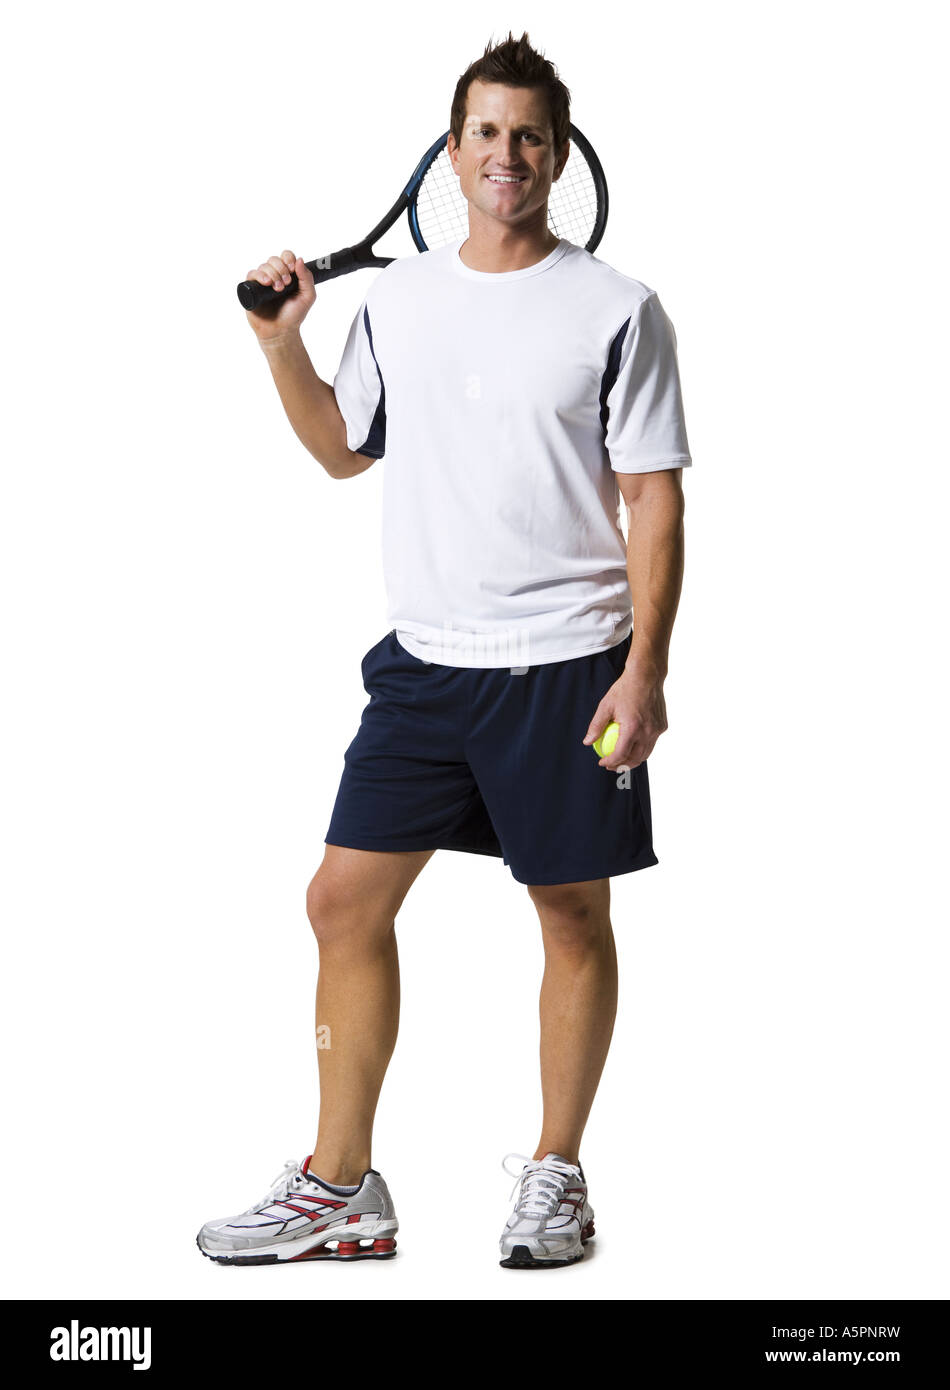 Male tennis player Stock Photo